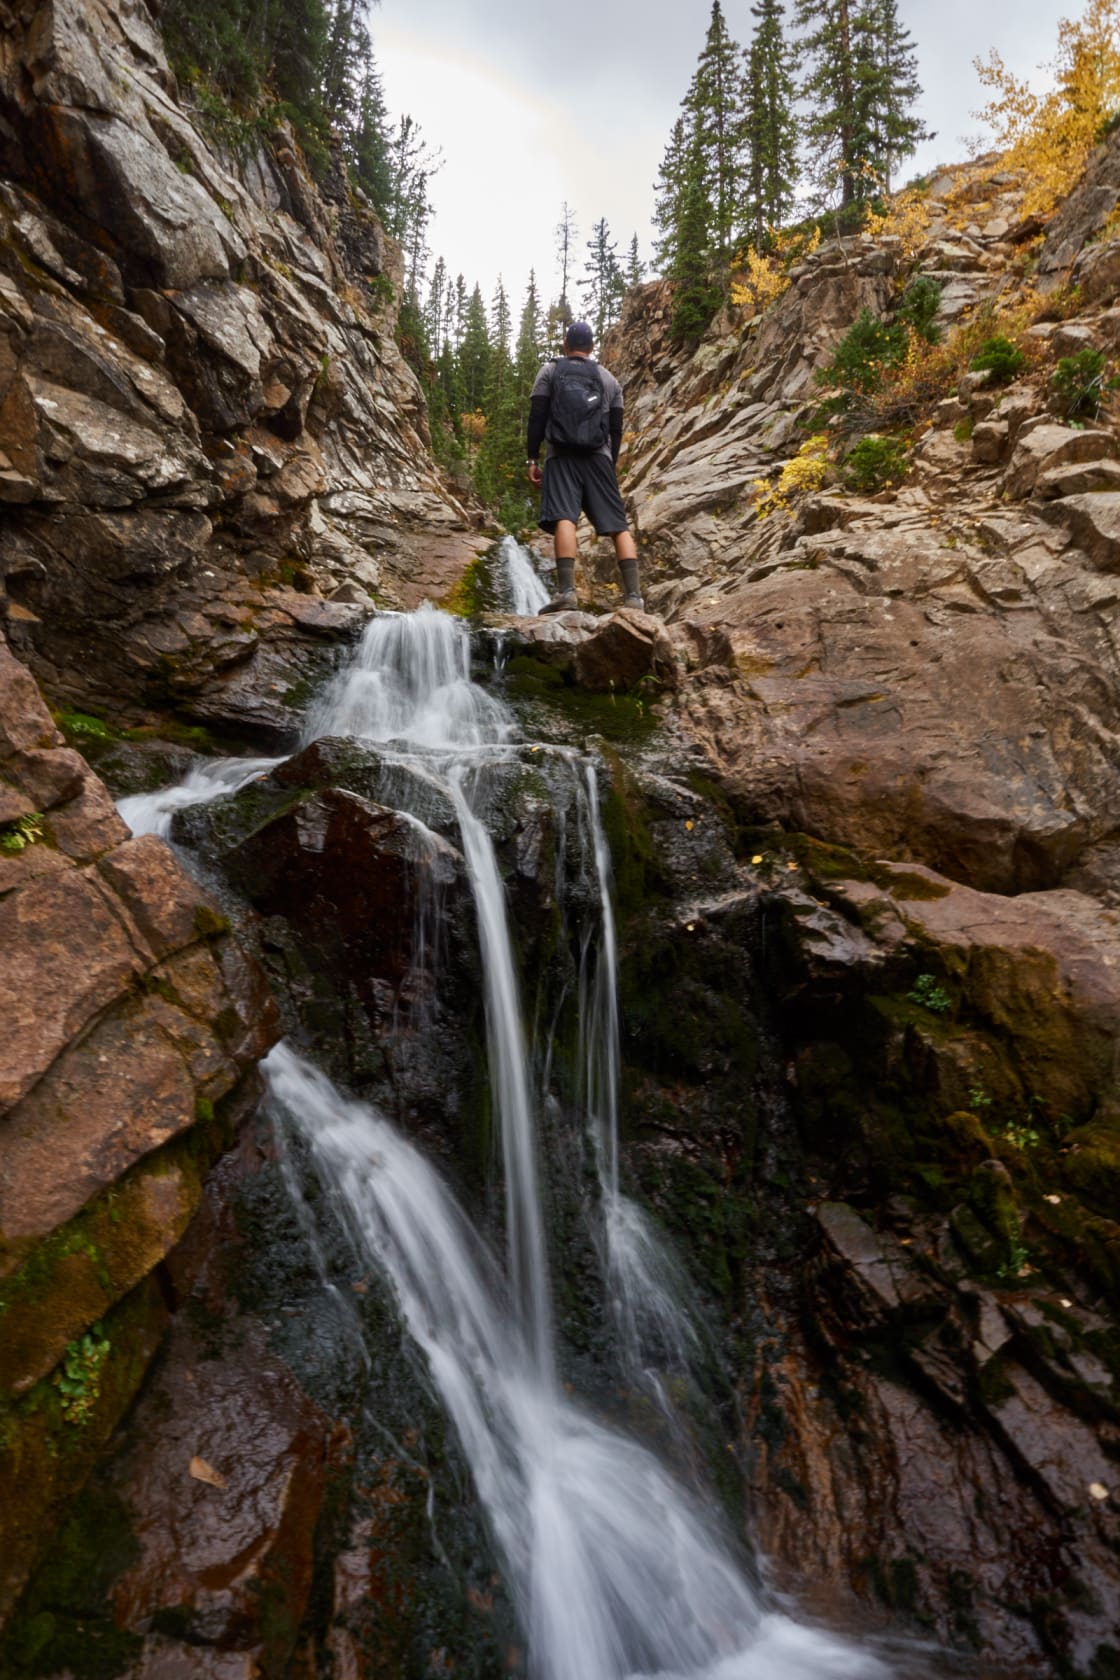 
Milky waterfalls and cascades await on the Three Lakes Loop. Embrace your inner explorer by adventuring on this short detour. (Just be careful with slippery rocks!)
